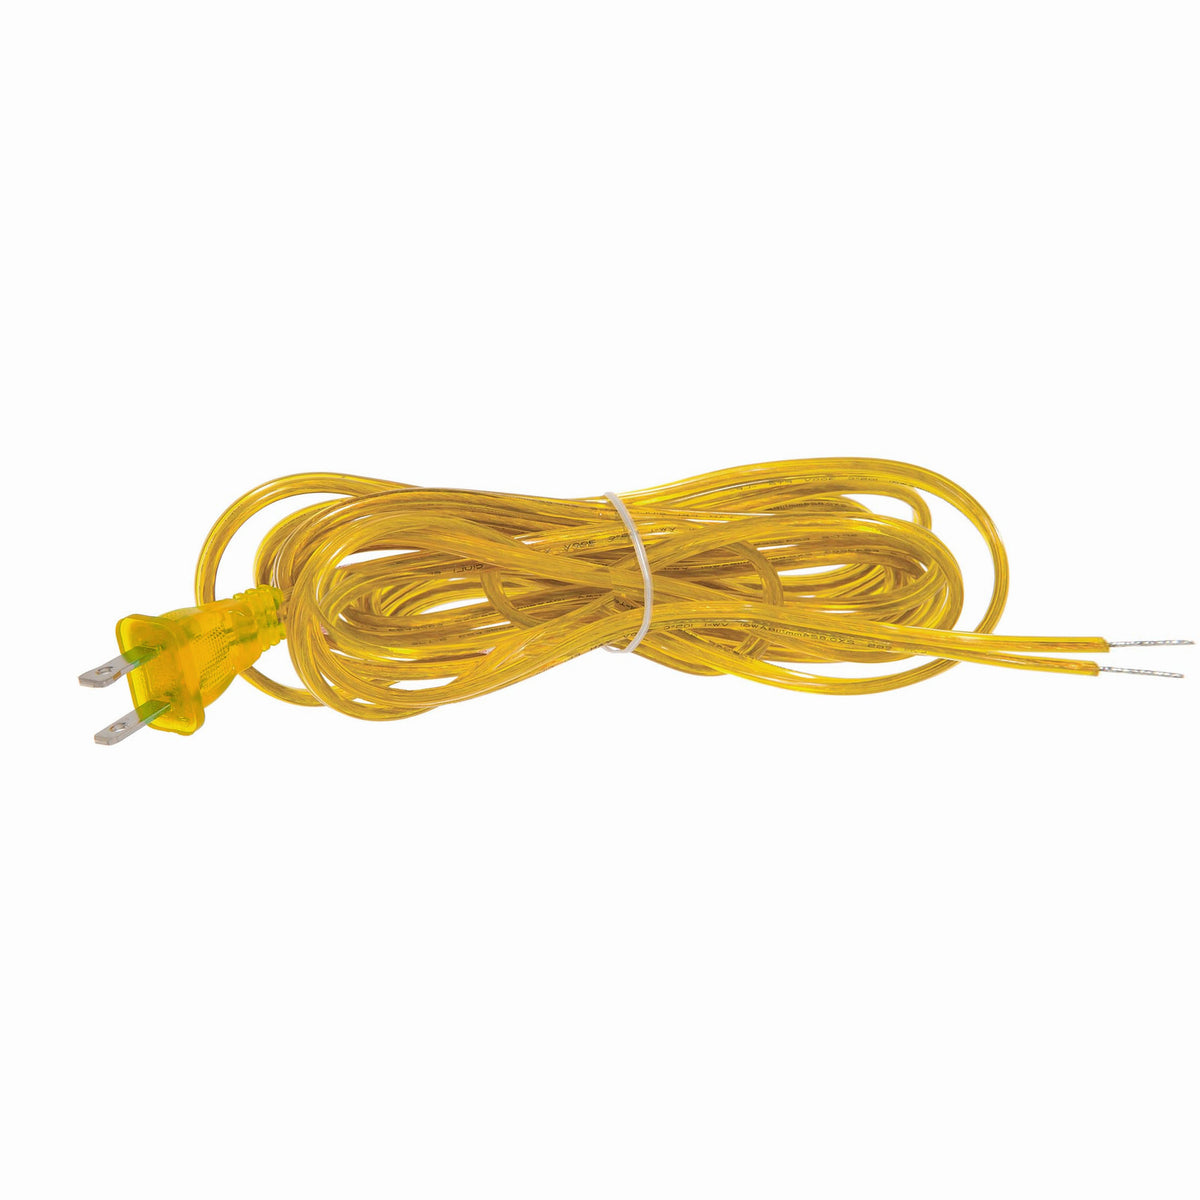 Gold Lamp Cords with Plugs, SPT2 12 Foot - Paxton hardware ltd